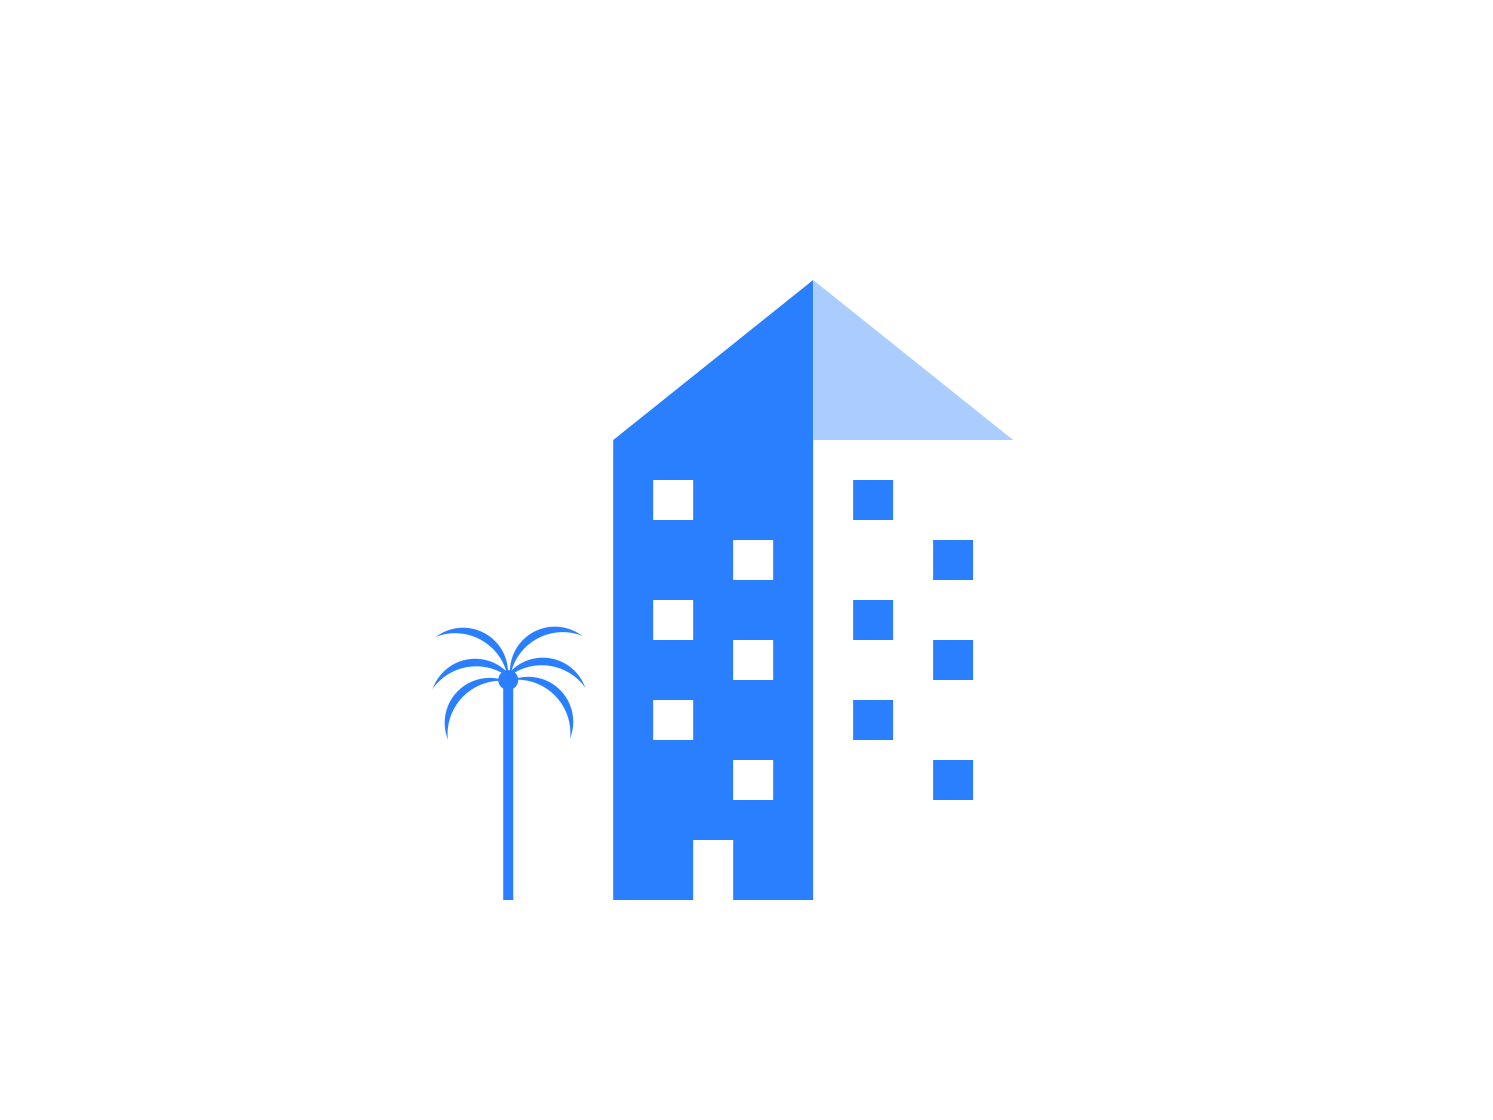 Bluehouse by Y E L B I C on Dribbble